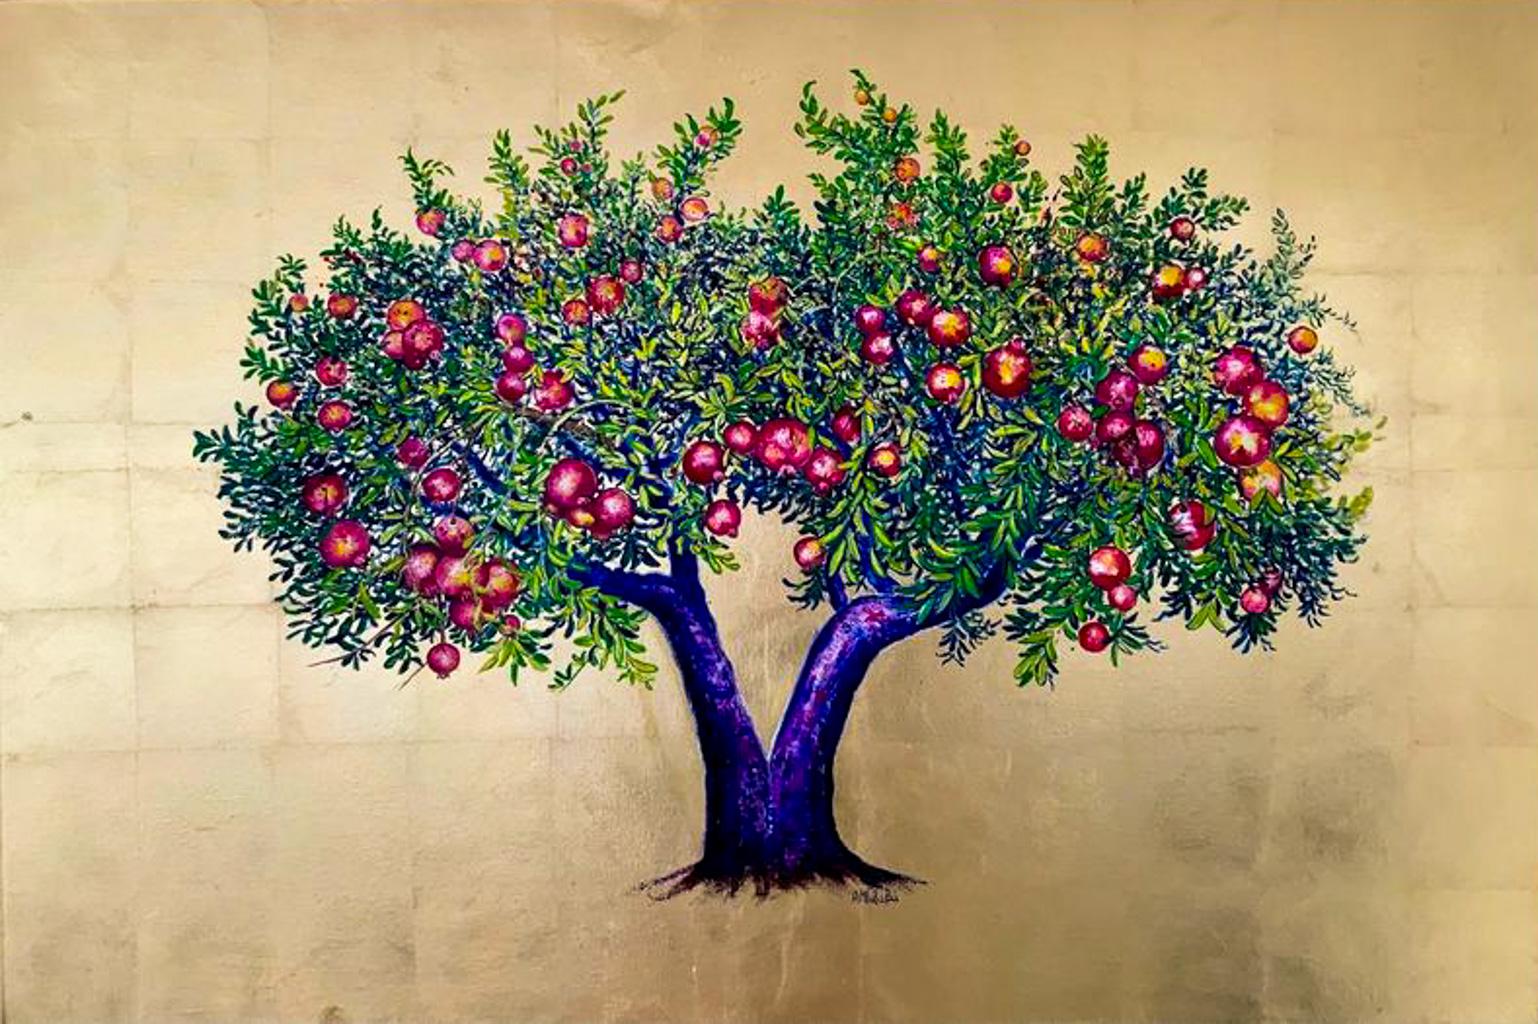 Anastasia Gklava Landscape Painting - "Fertility", oil and gold leaf painting of vibrant pomegranate tree 